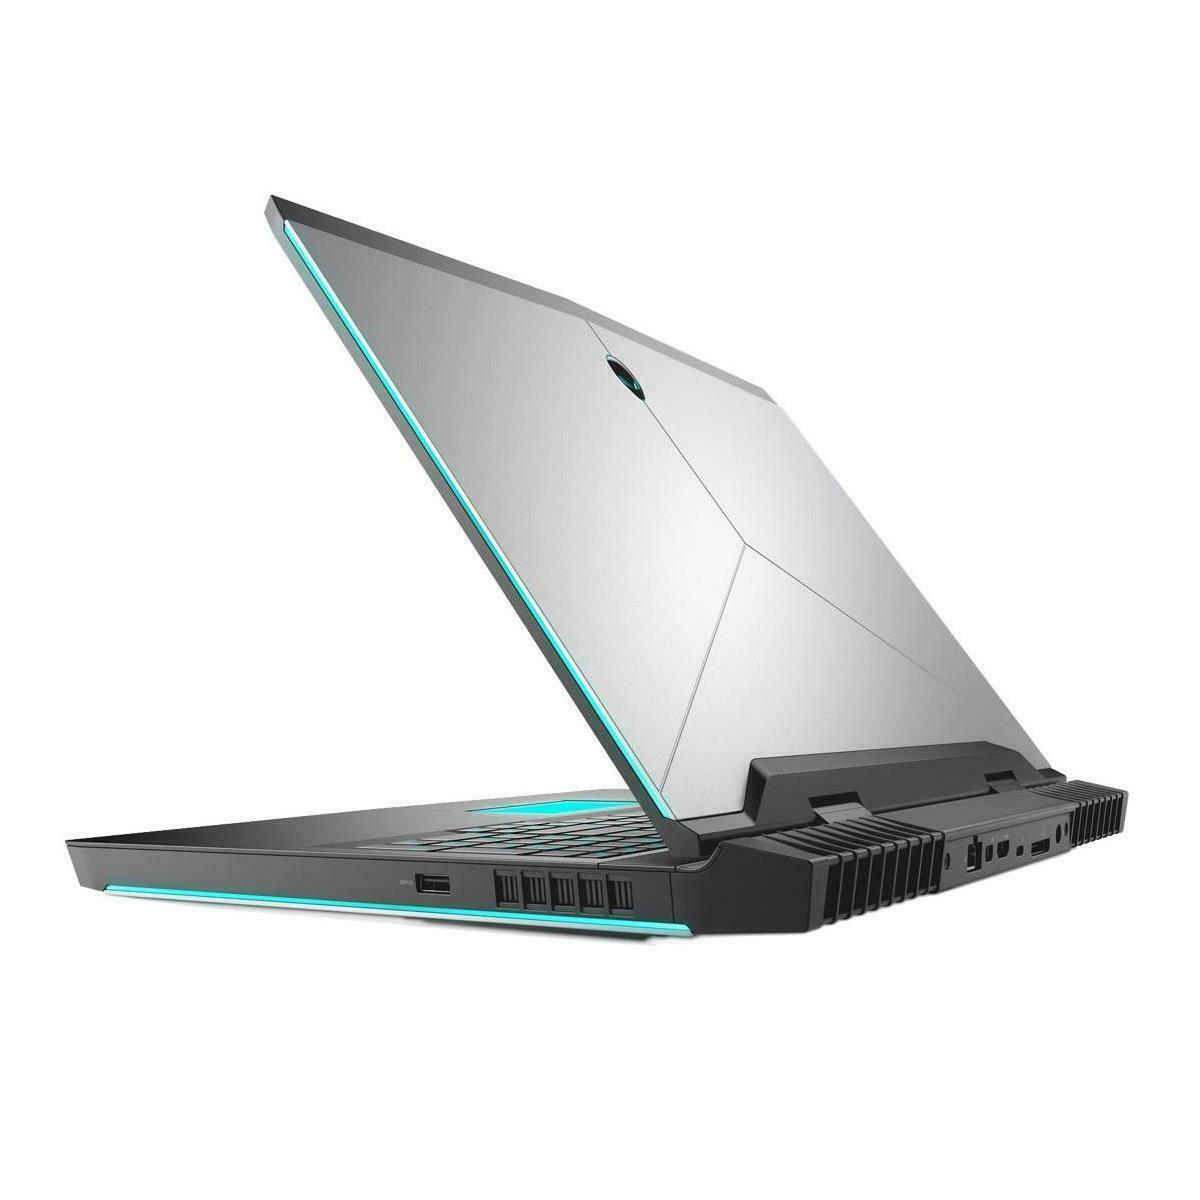 alienware os on 1 tb hdd